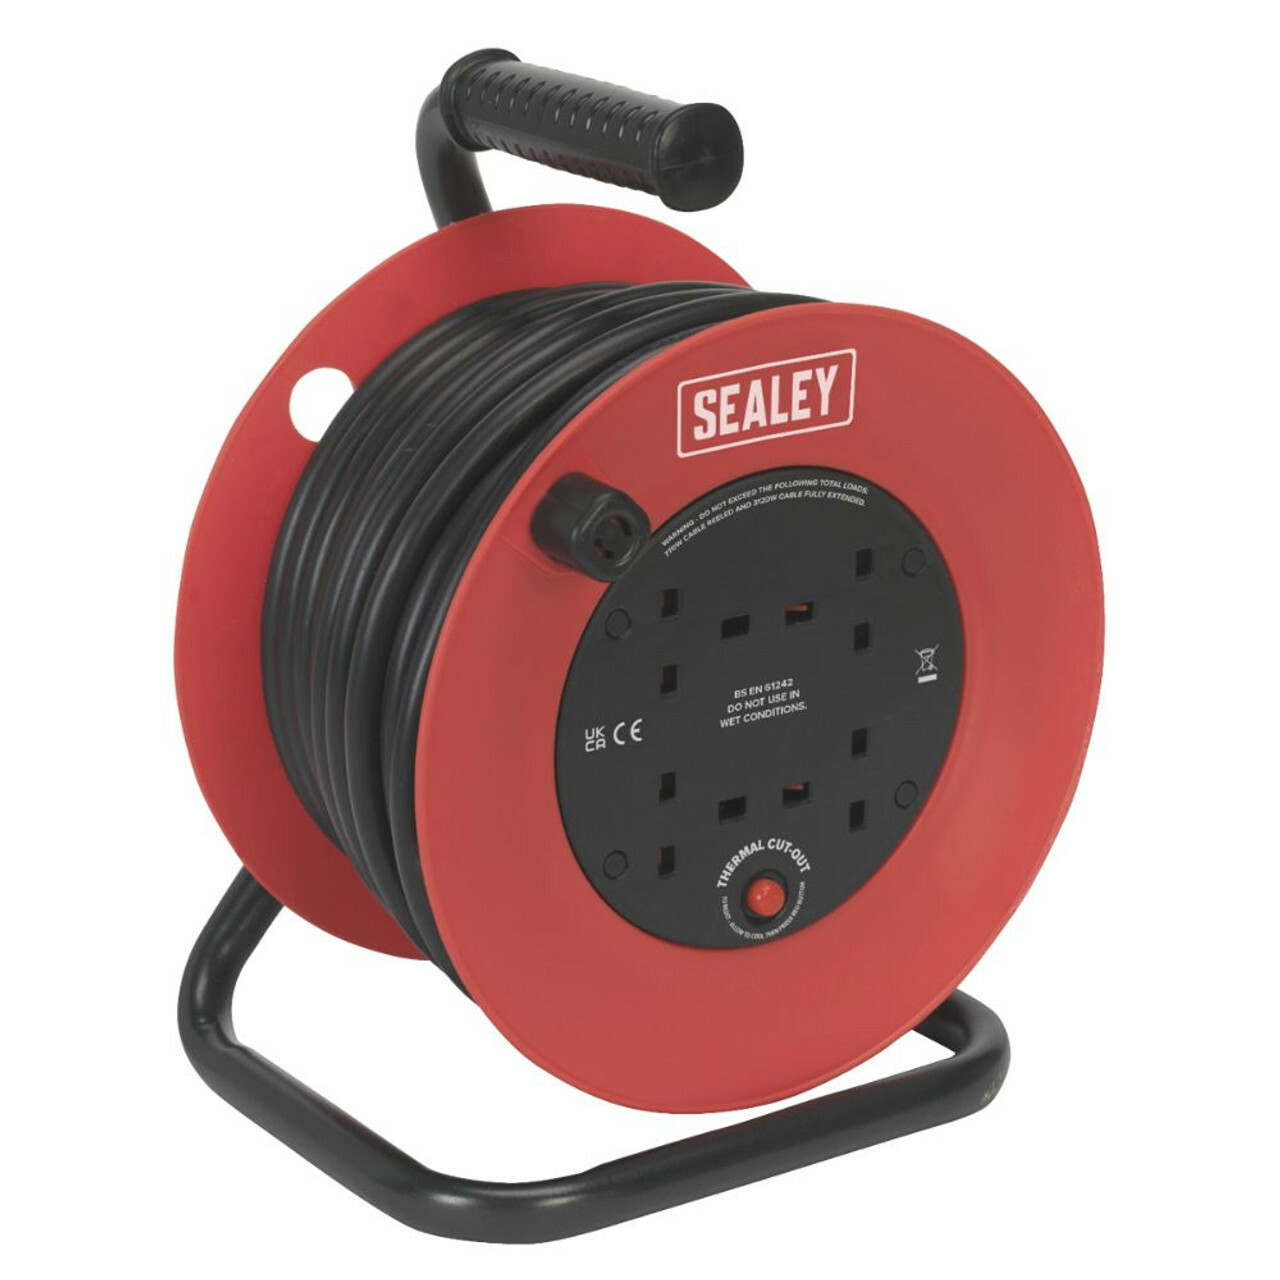 Sealey Cable reels and Extension Cords